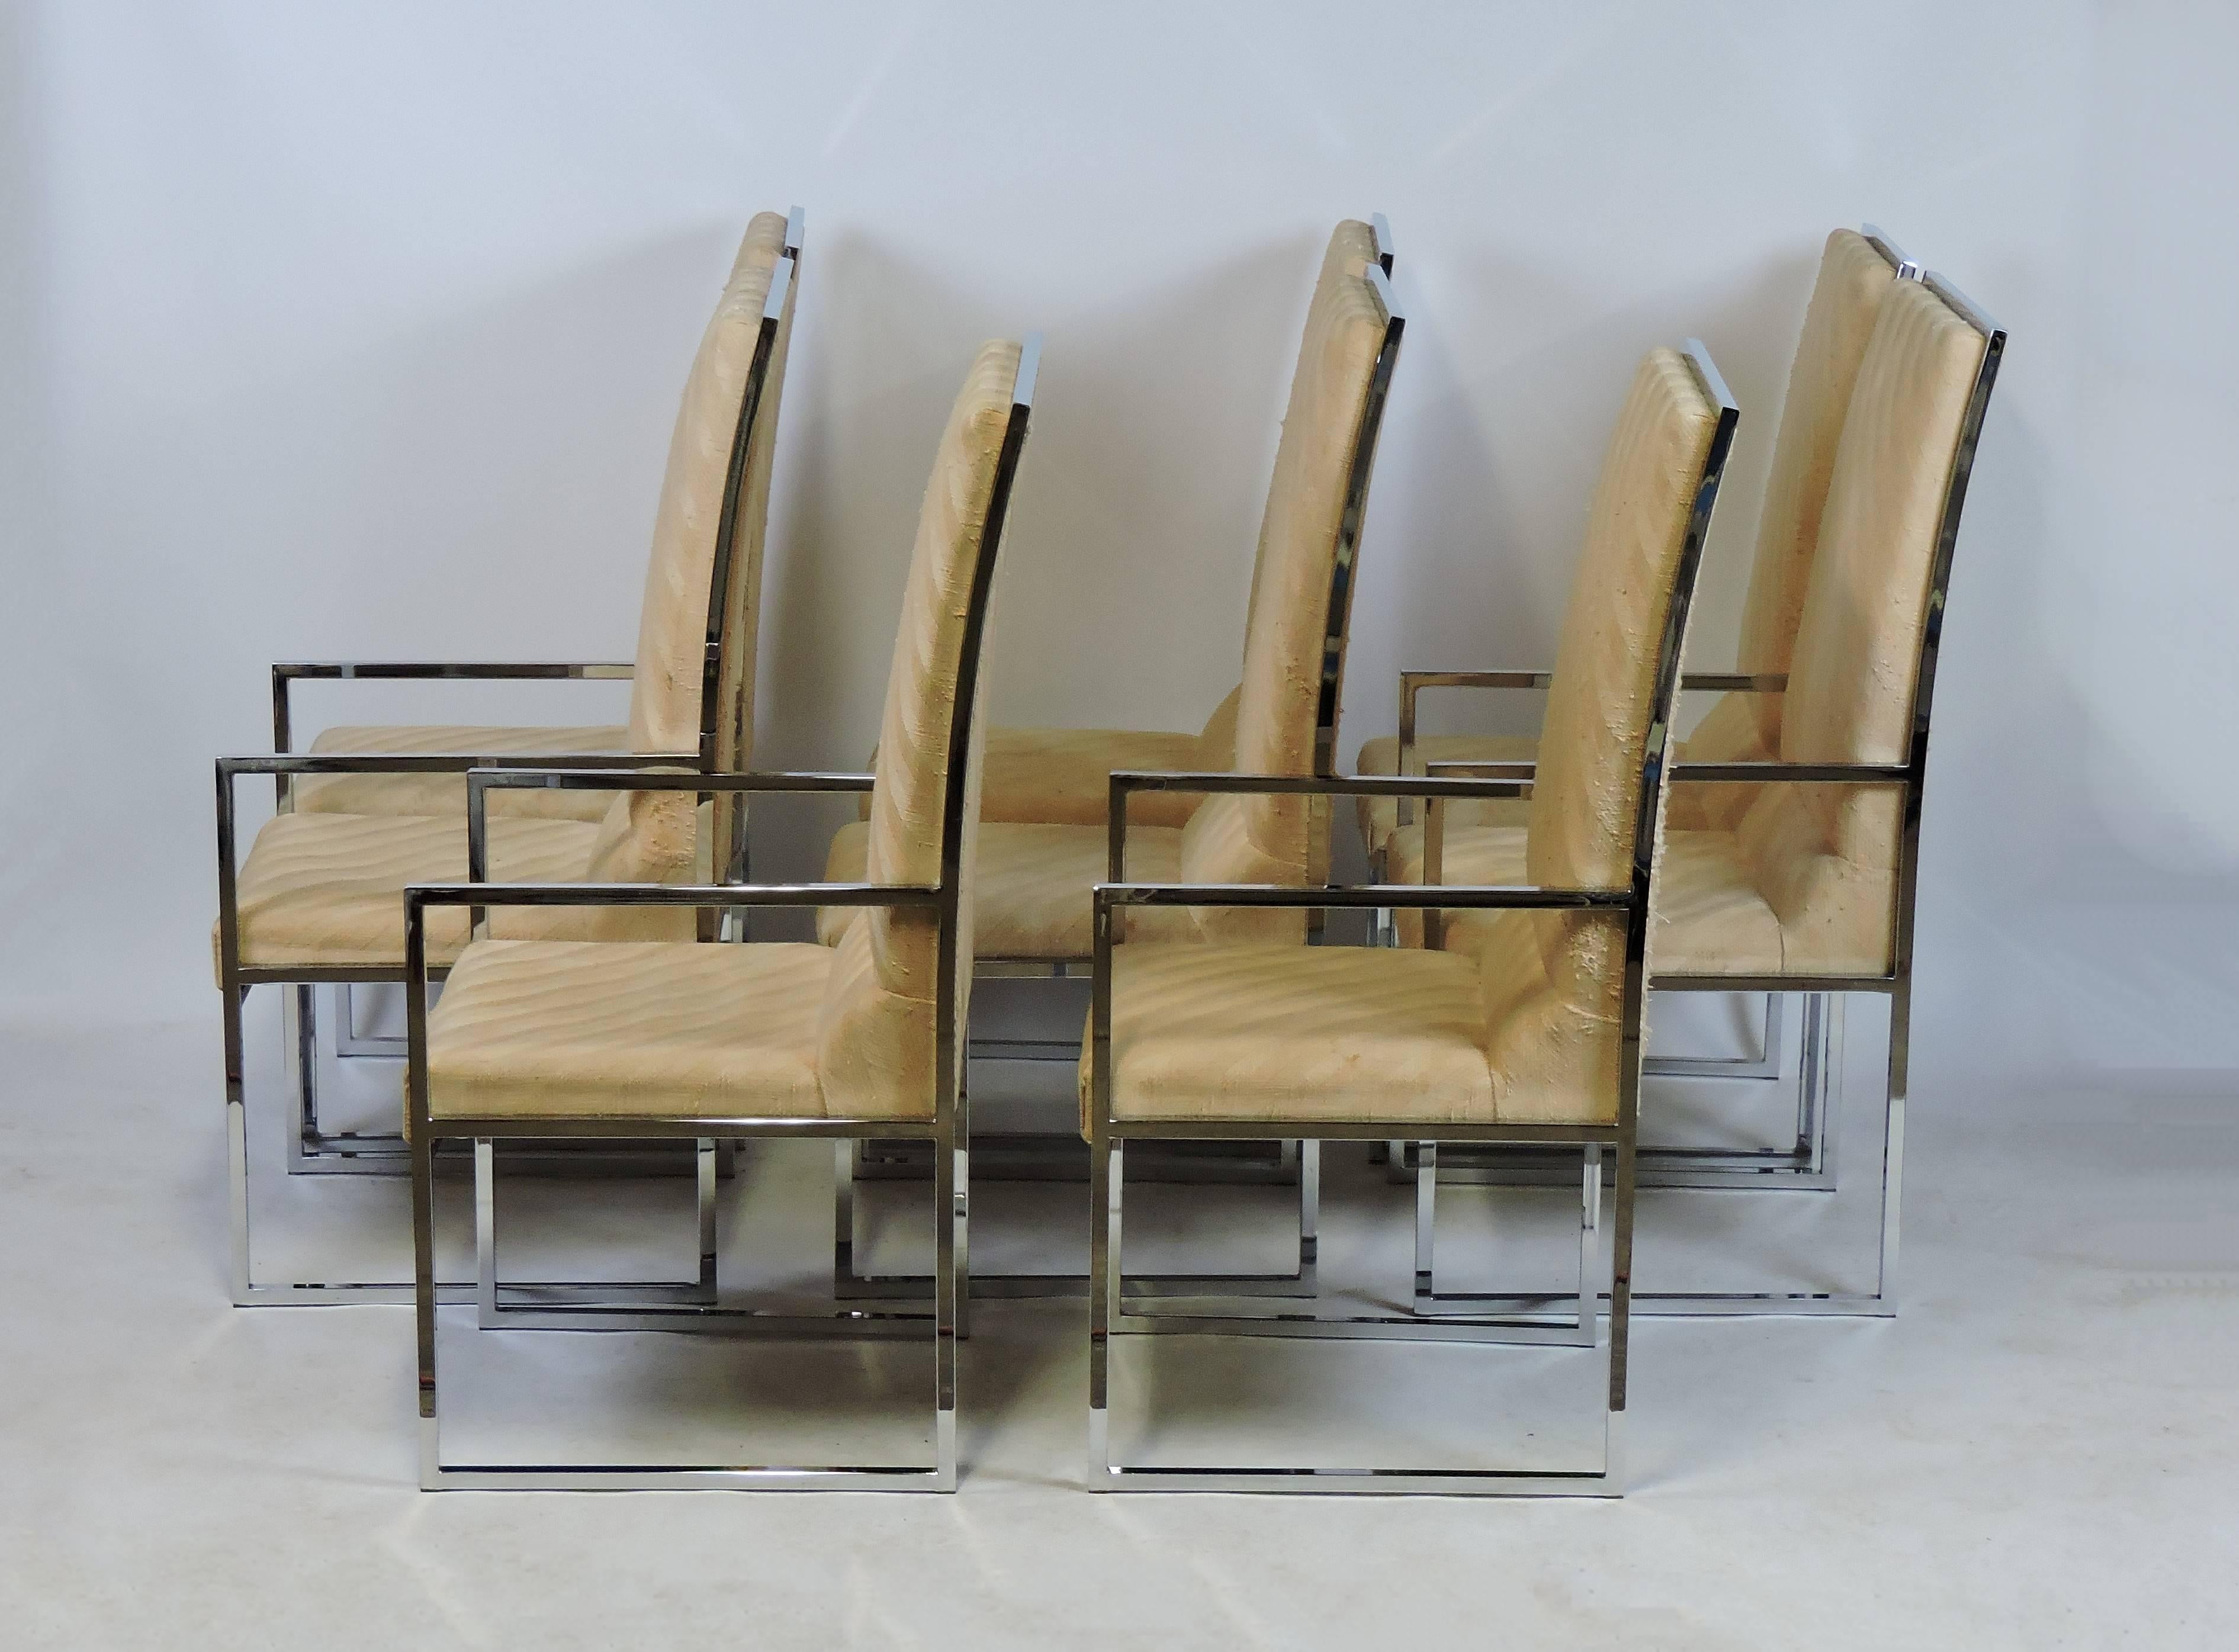 Handsome set of ten high back dining chairs manufactured by Design Institute of America. These heavy and high quality chairs have a clean, classic look with thin chrome frames and upholstered backs and seats. This unusually large set includes four